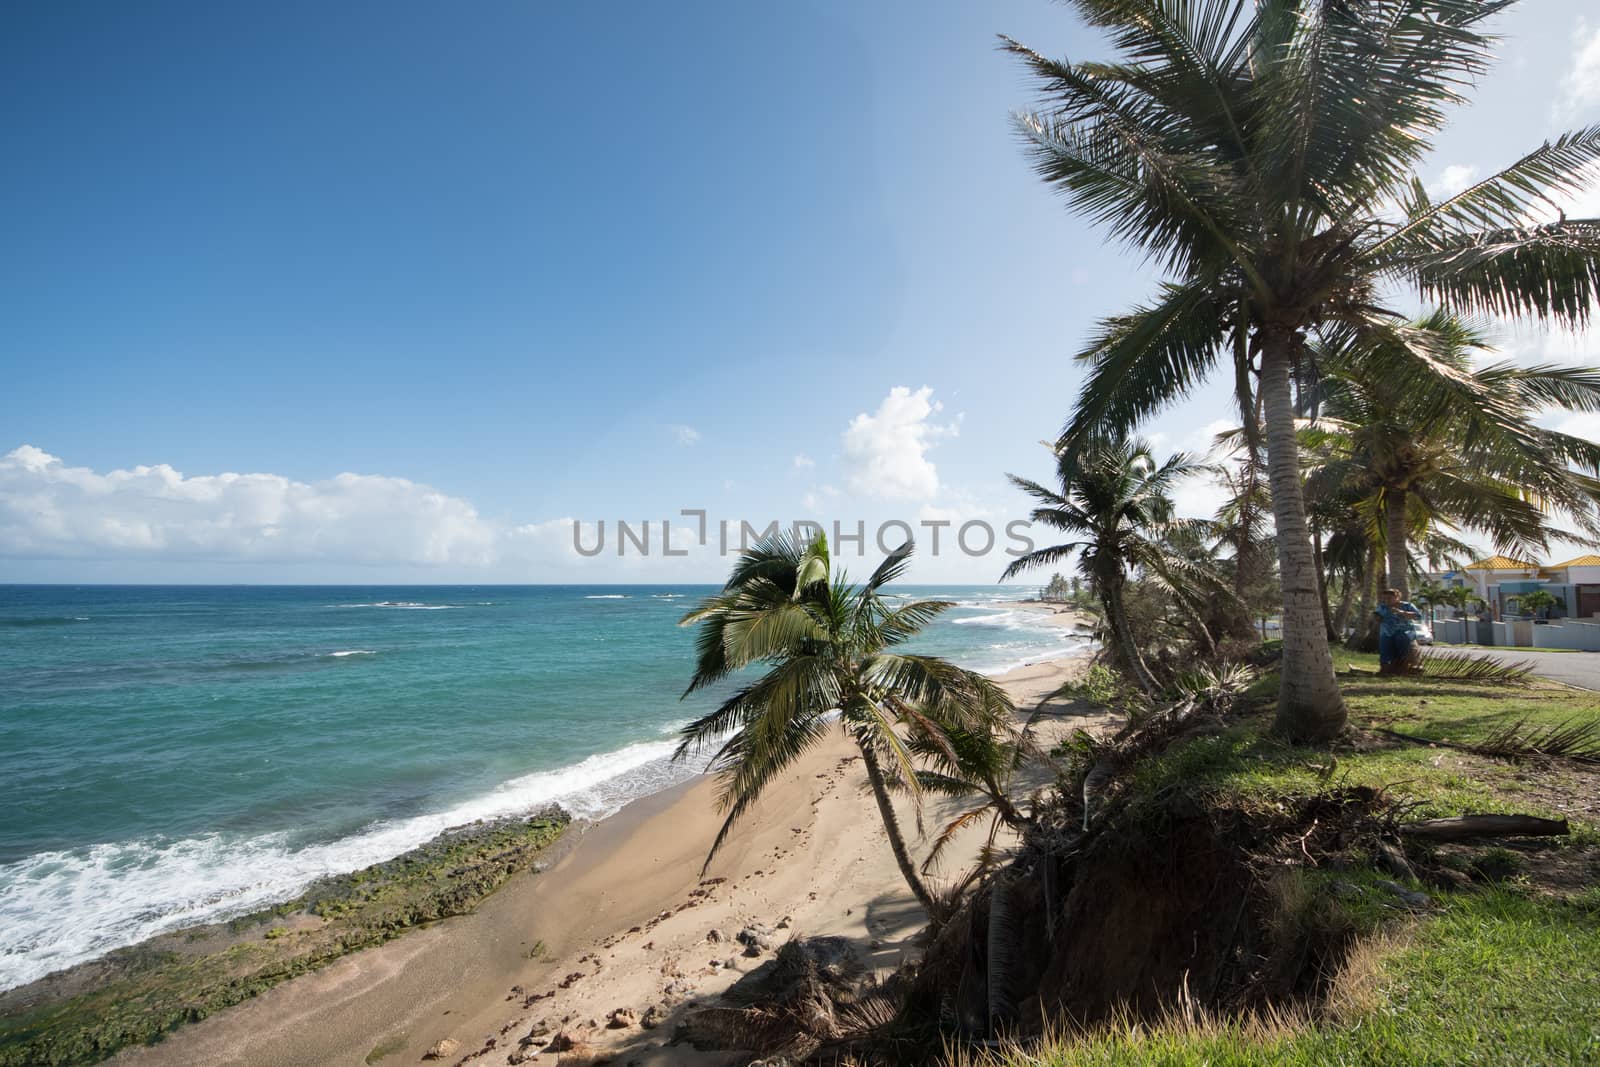 Hatillo, Puerto Rico beach scene with palms and emerald green water.